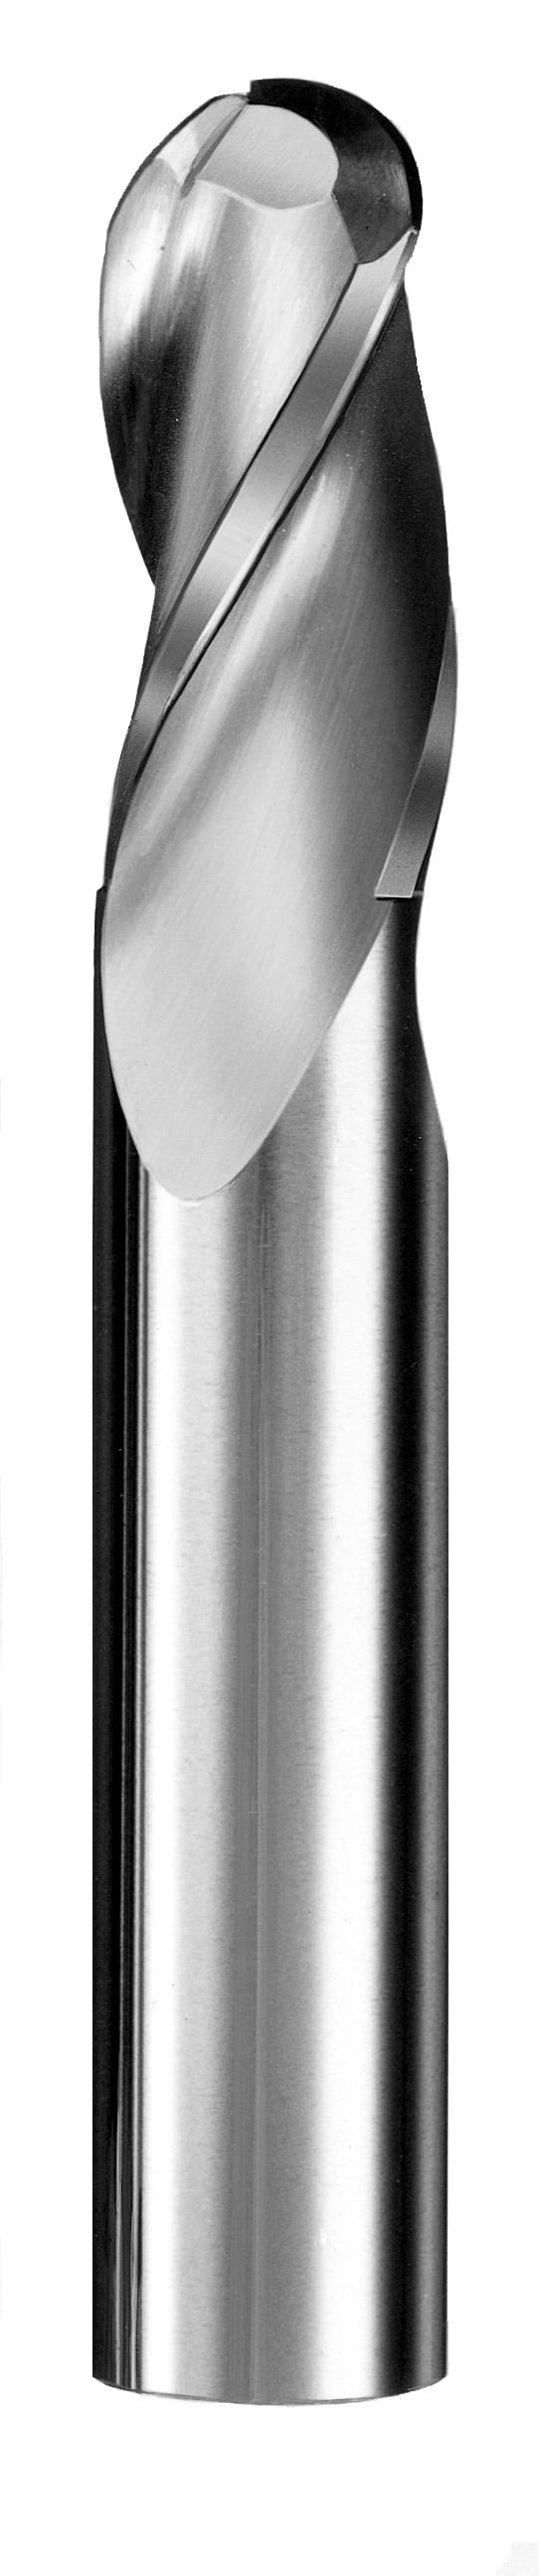 11/16" Dia, 3 Flute, Ball Nose End Mill - 30570